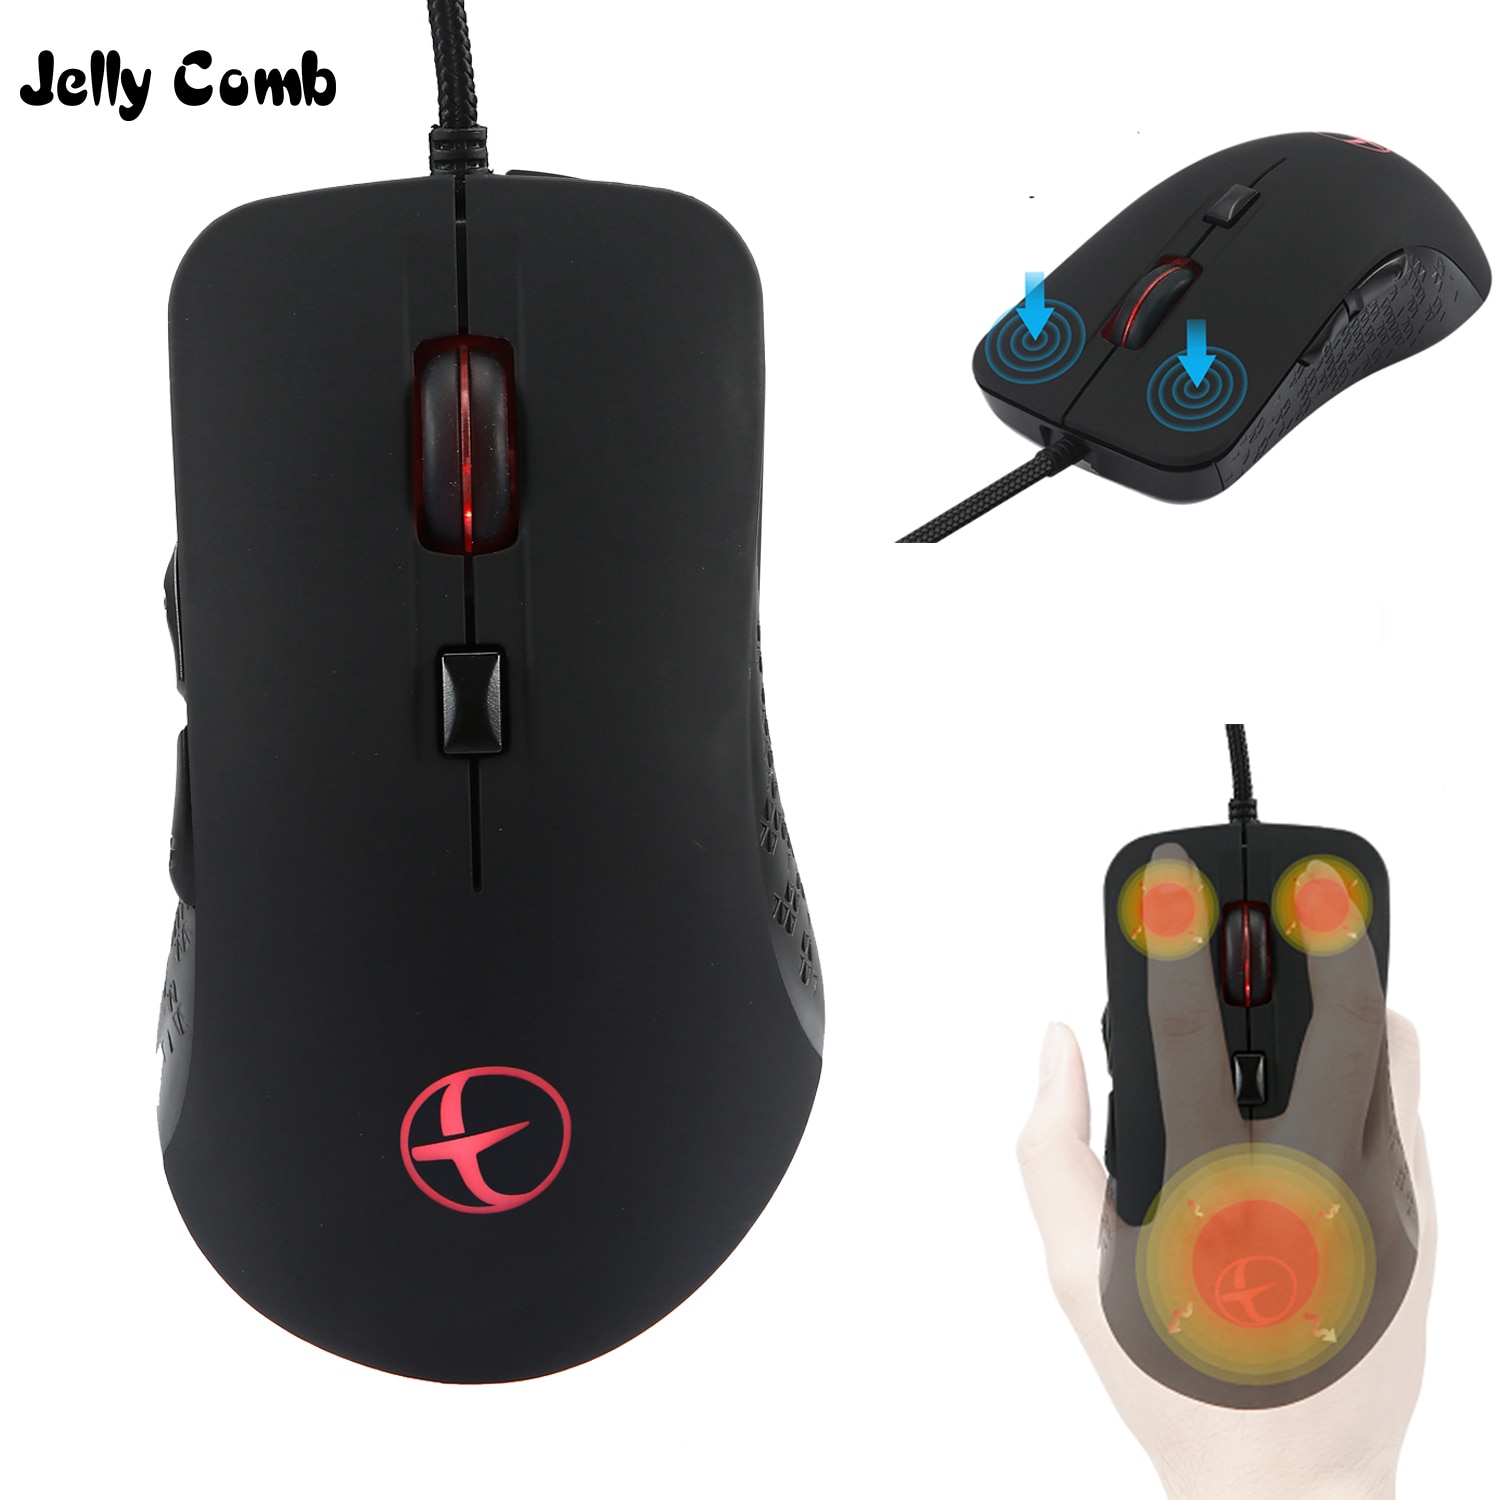 Jelly Comb Wired Warmer Heated Mouse for Laptop Notebook Programmable 6 Buttons Gaming Mouse 2400 DPI Adjustable Mouse for Gamer